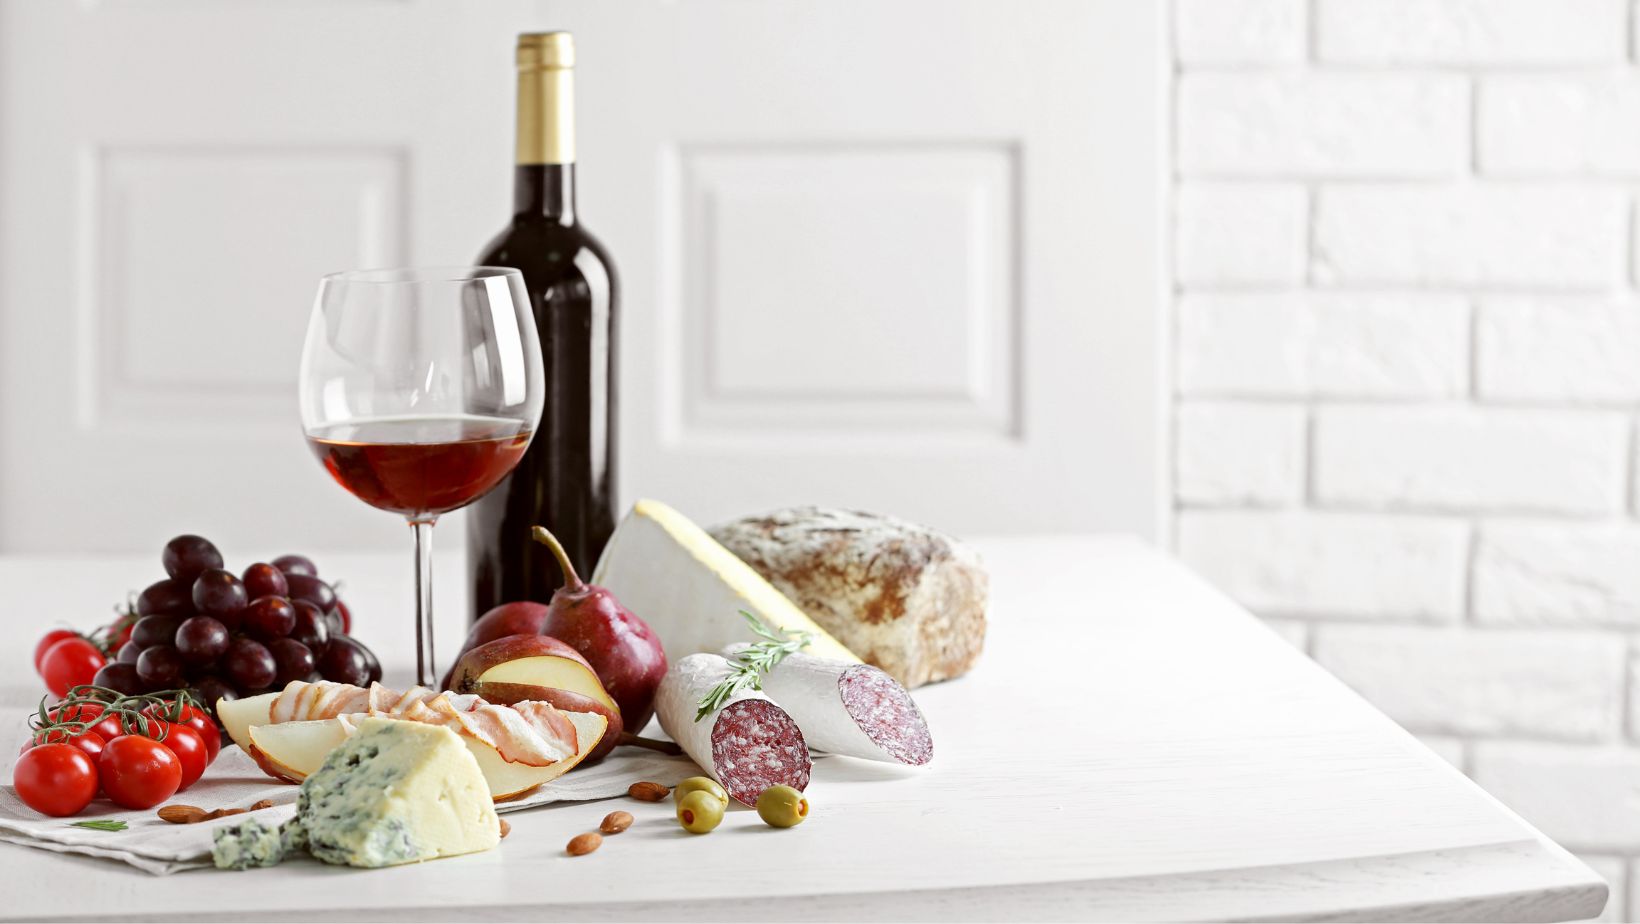 platings pairings a food blog focusing on great simple dishes and the wines that pair with them